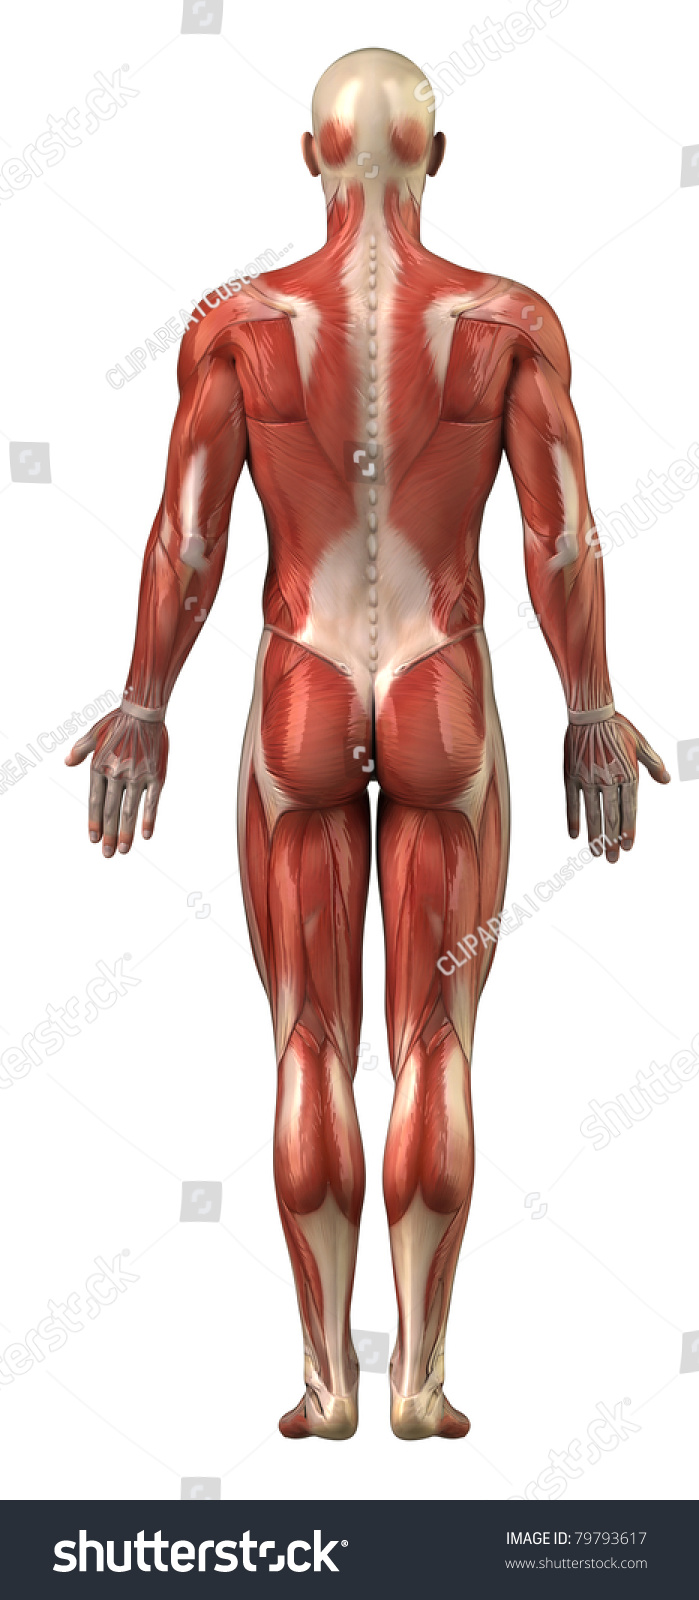 A Full Size Photo Of The Muscular System 36